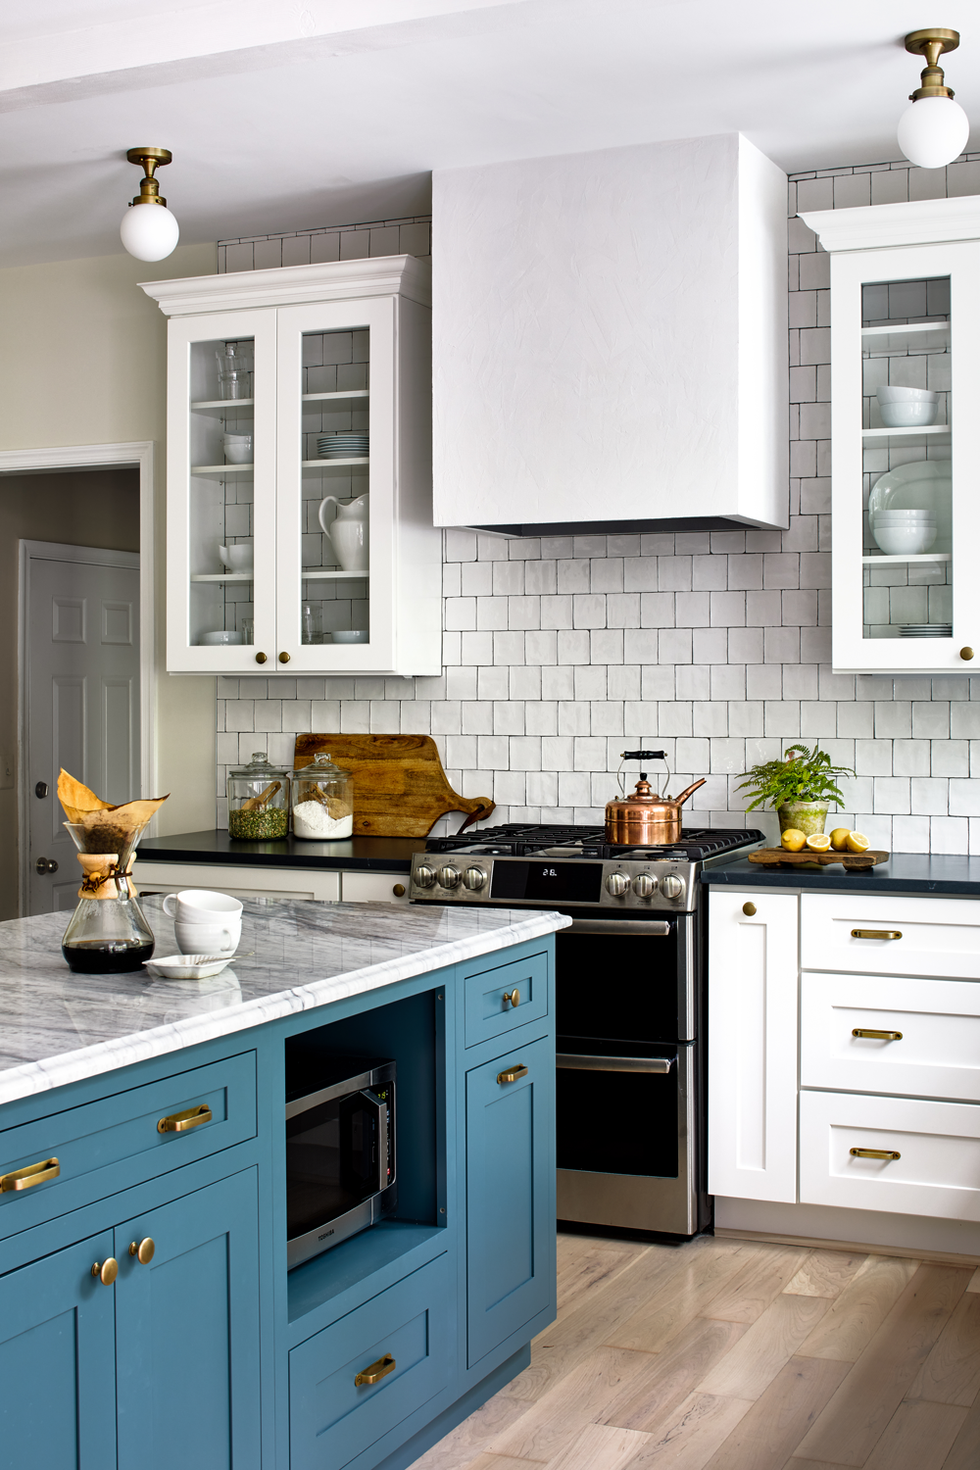 Top 40 Kitchen Trends for 2023 That Our Editors Love